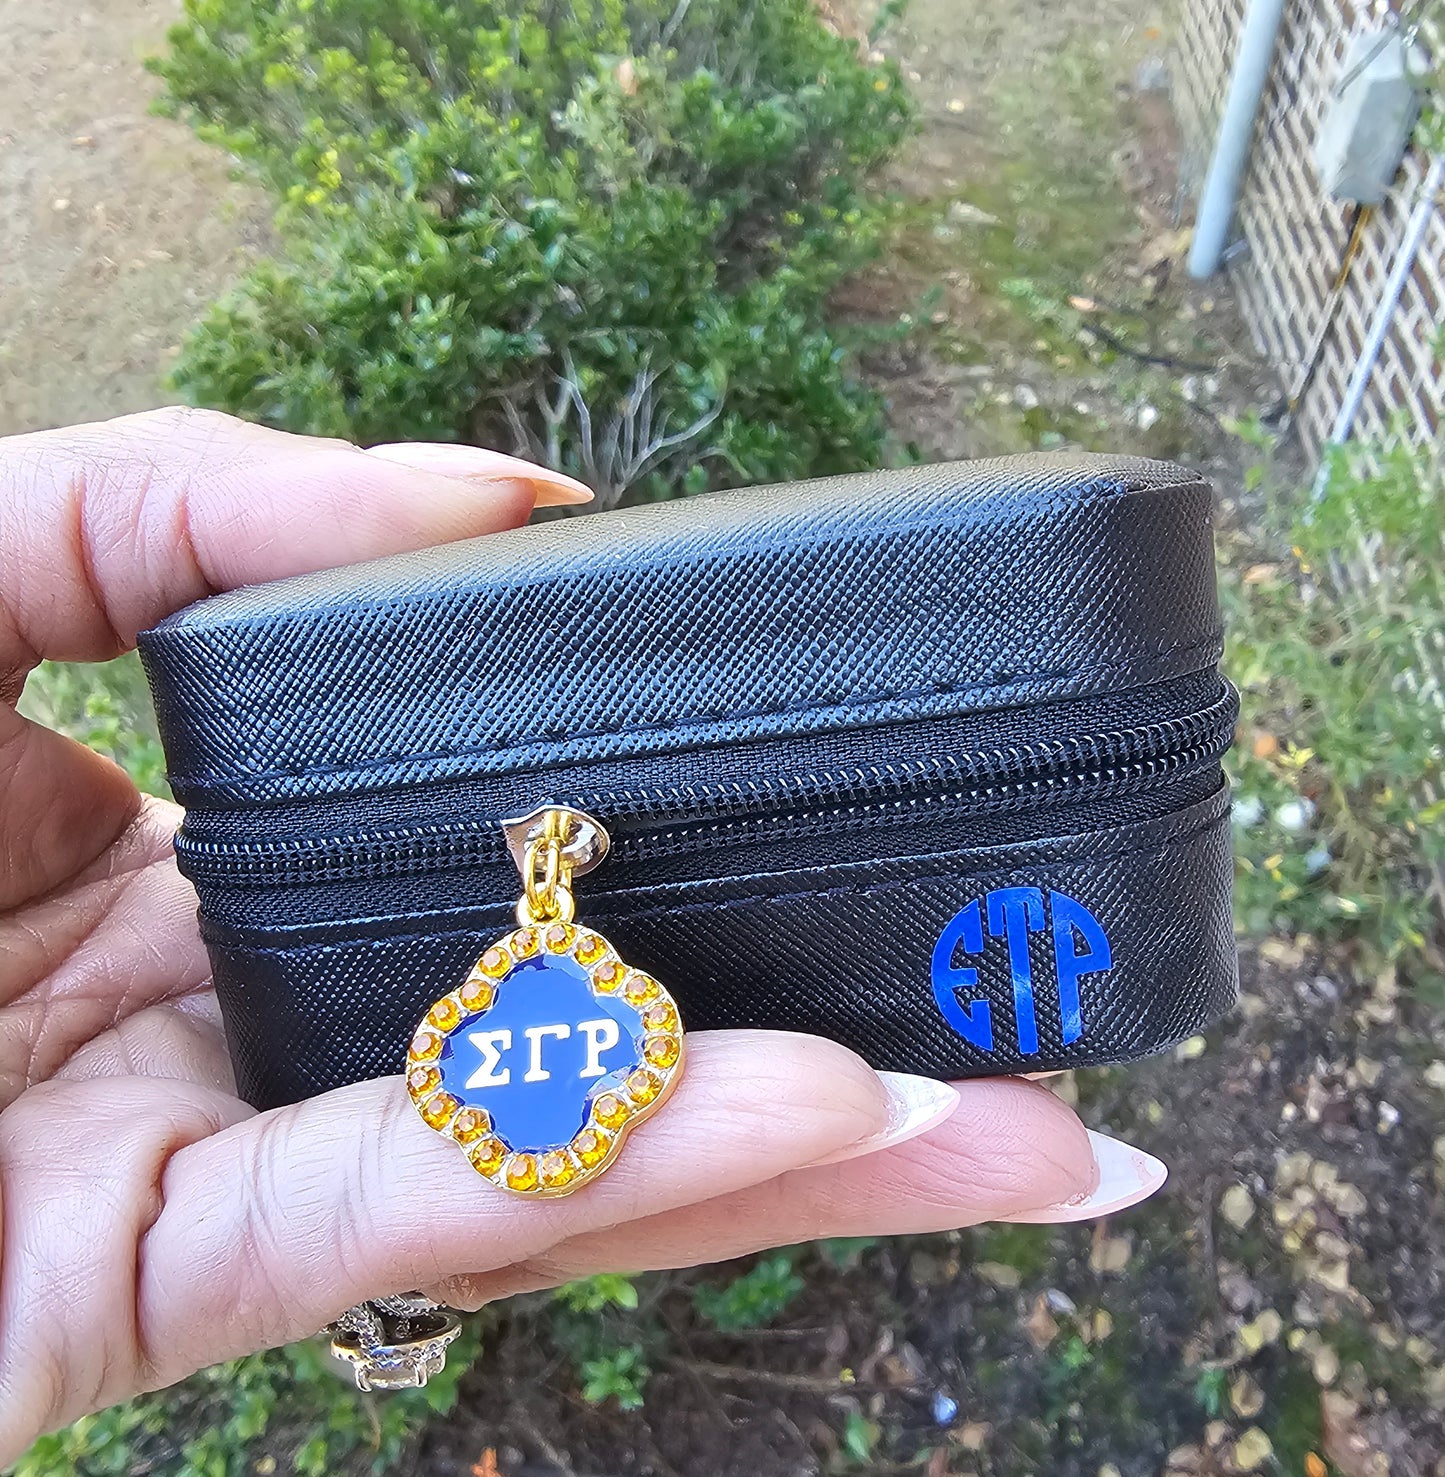 Small Sigma Gamma Rho Jewelry Boxes Available in Beat For Traveling